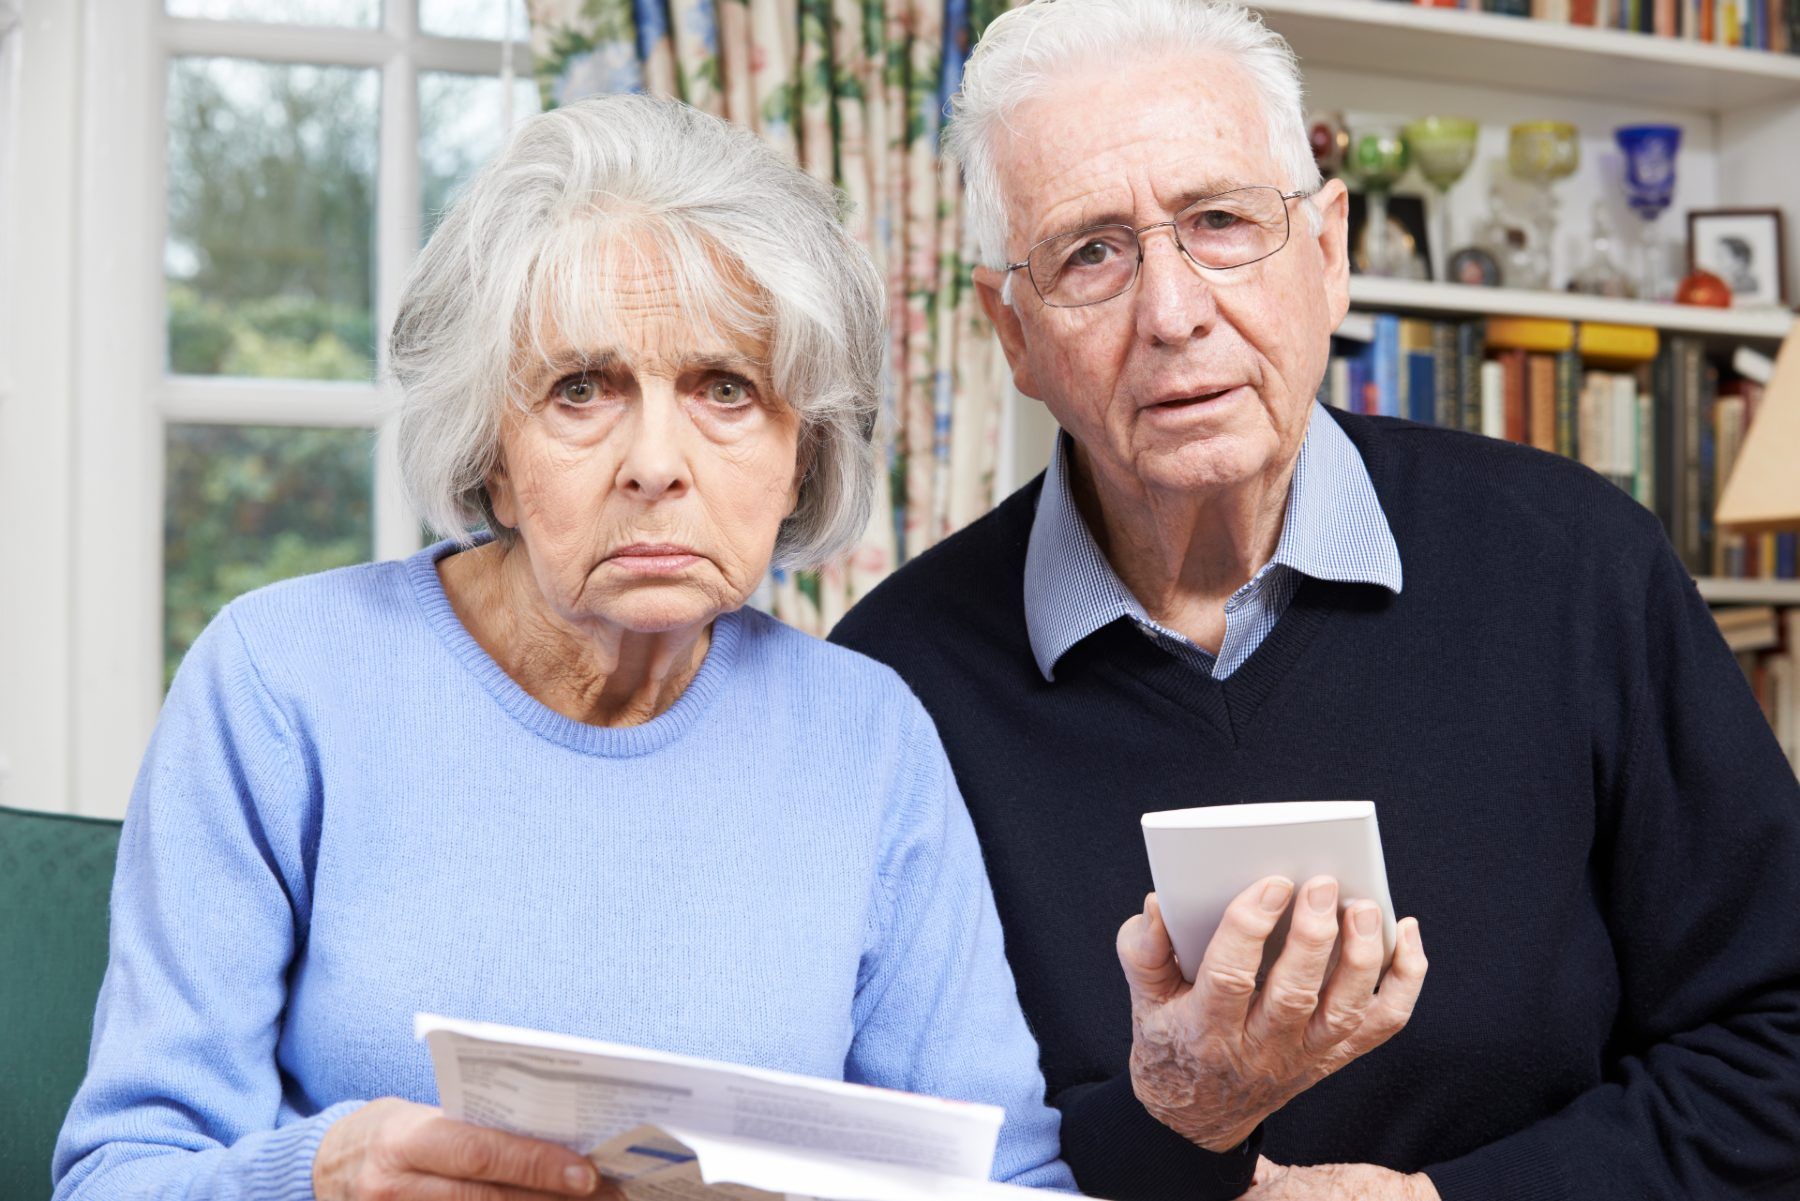 A worried older couple holds paperwork and a calculator while looking into the camera - pension scams